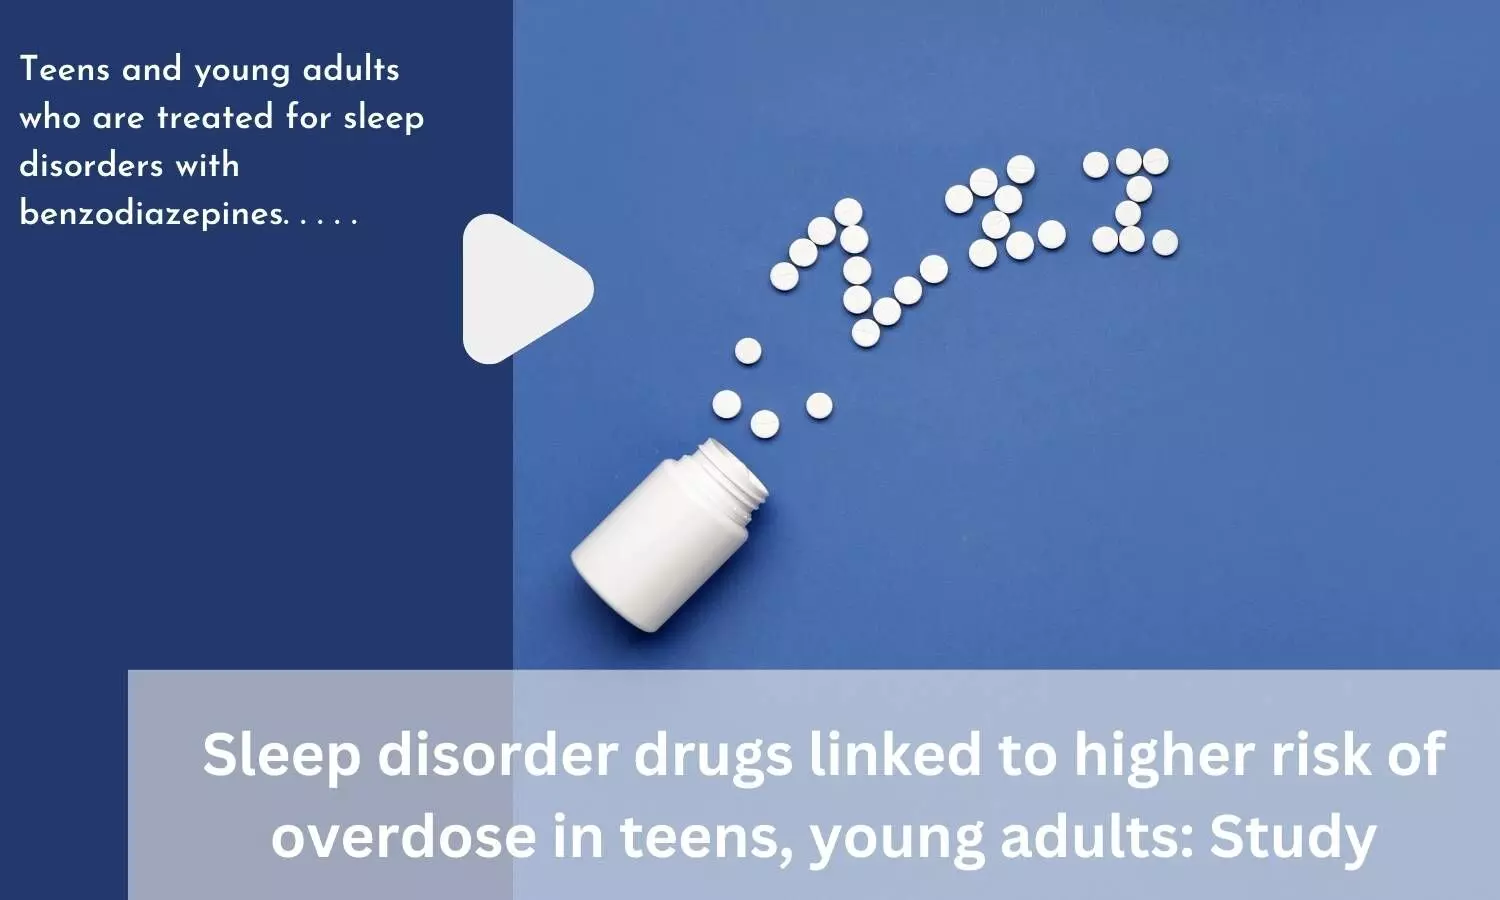 Sleep disorder drugs linked to higher risk of overdose in teens, young adults: Study